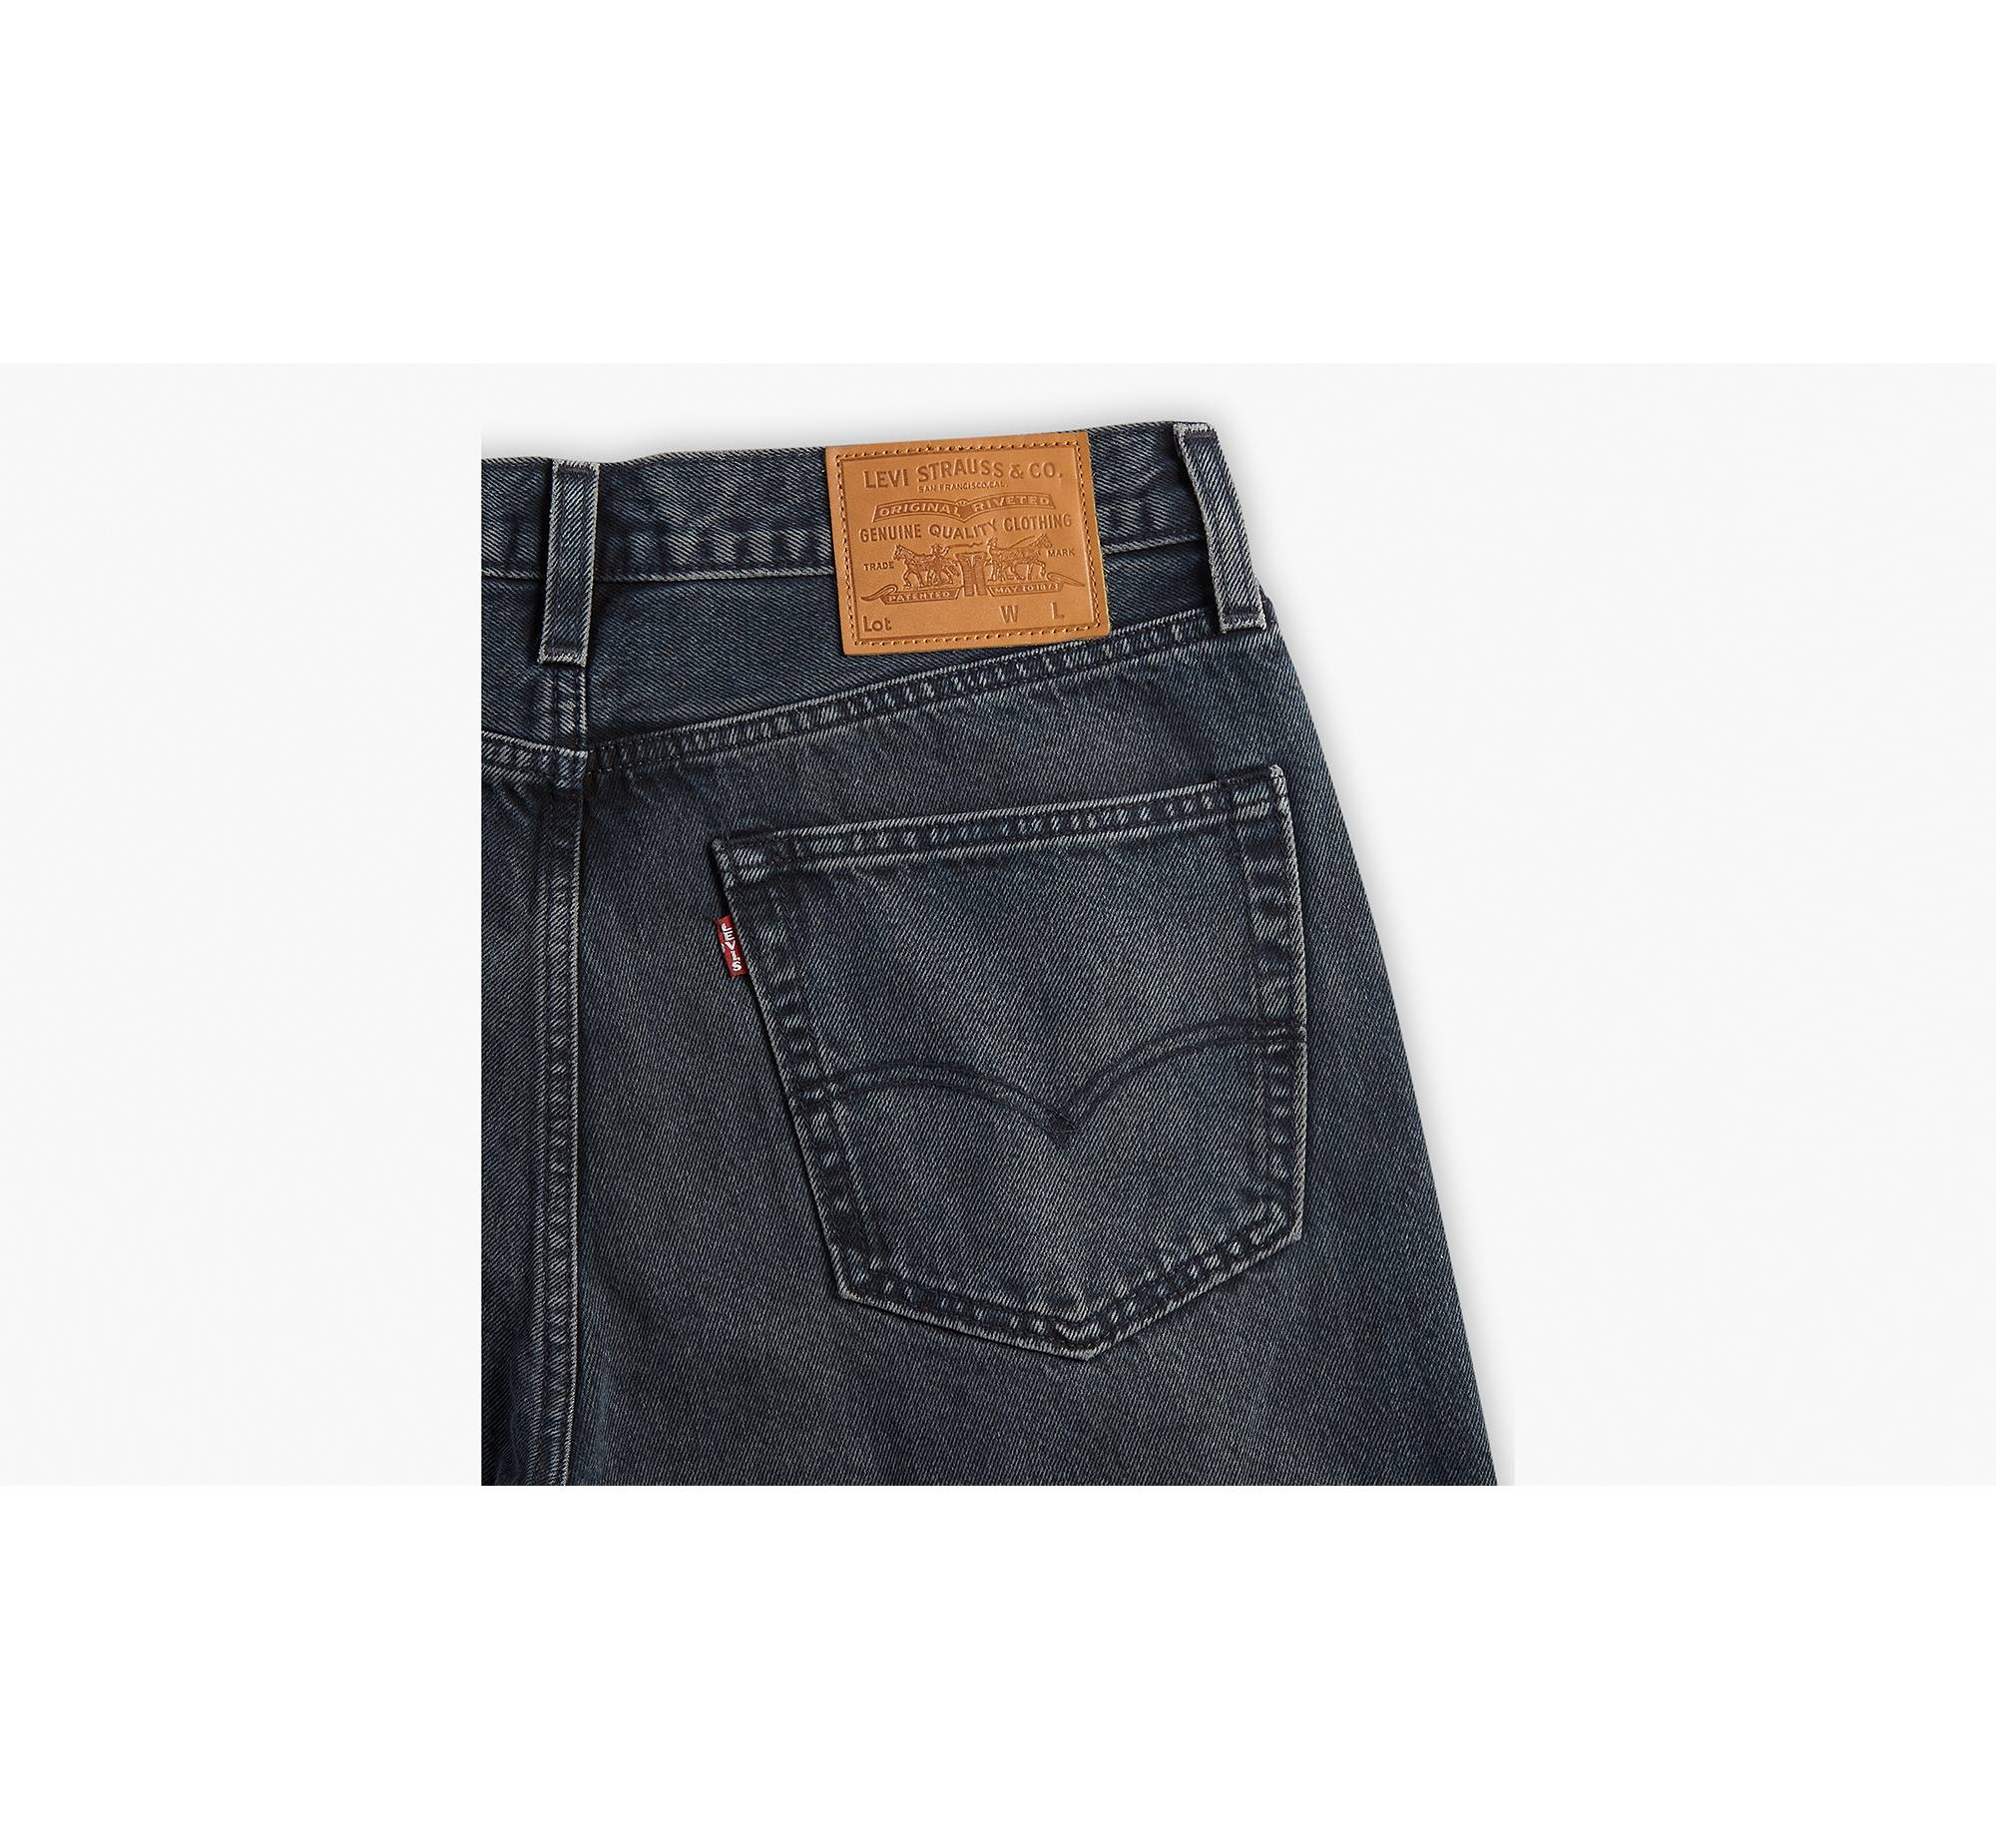 Dark Blue, Light Blue or Black Denim STRETCH Jean Patches Super Strong Iron  On by Holey Patches assorted Sizes 